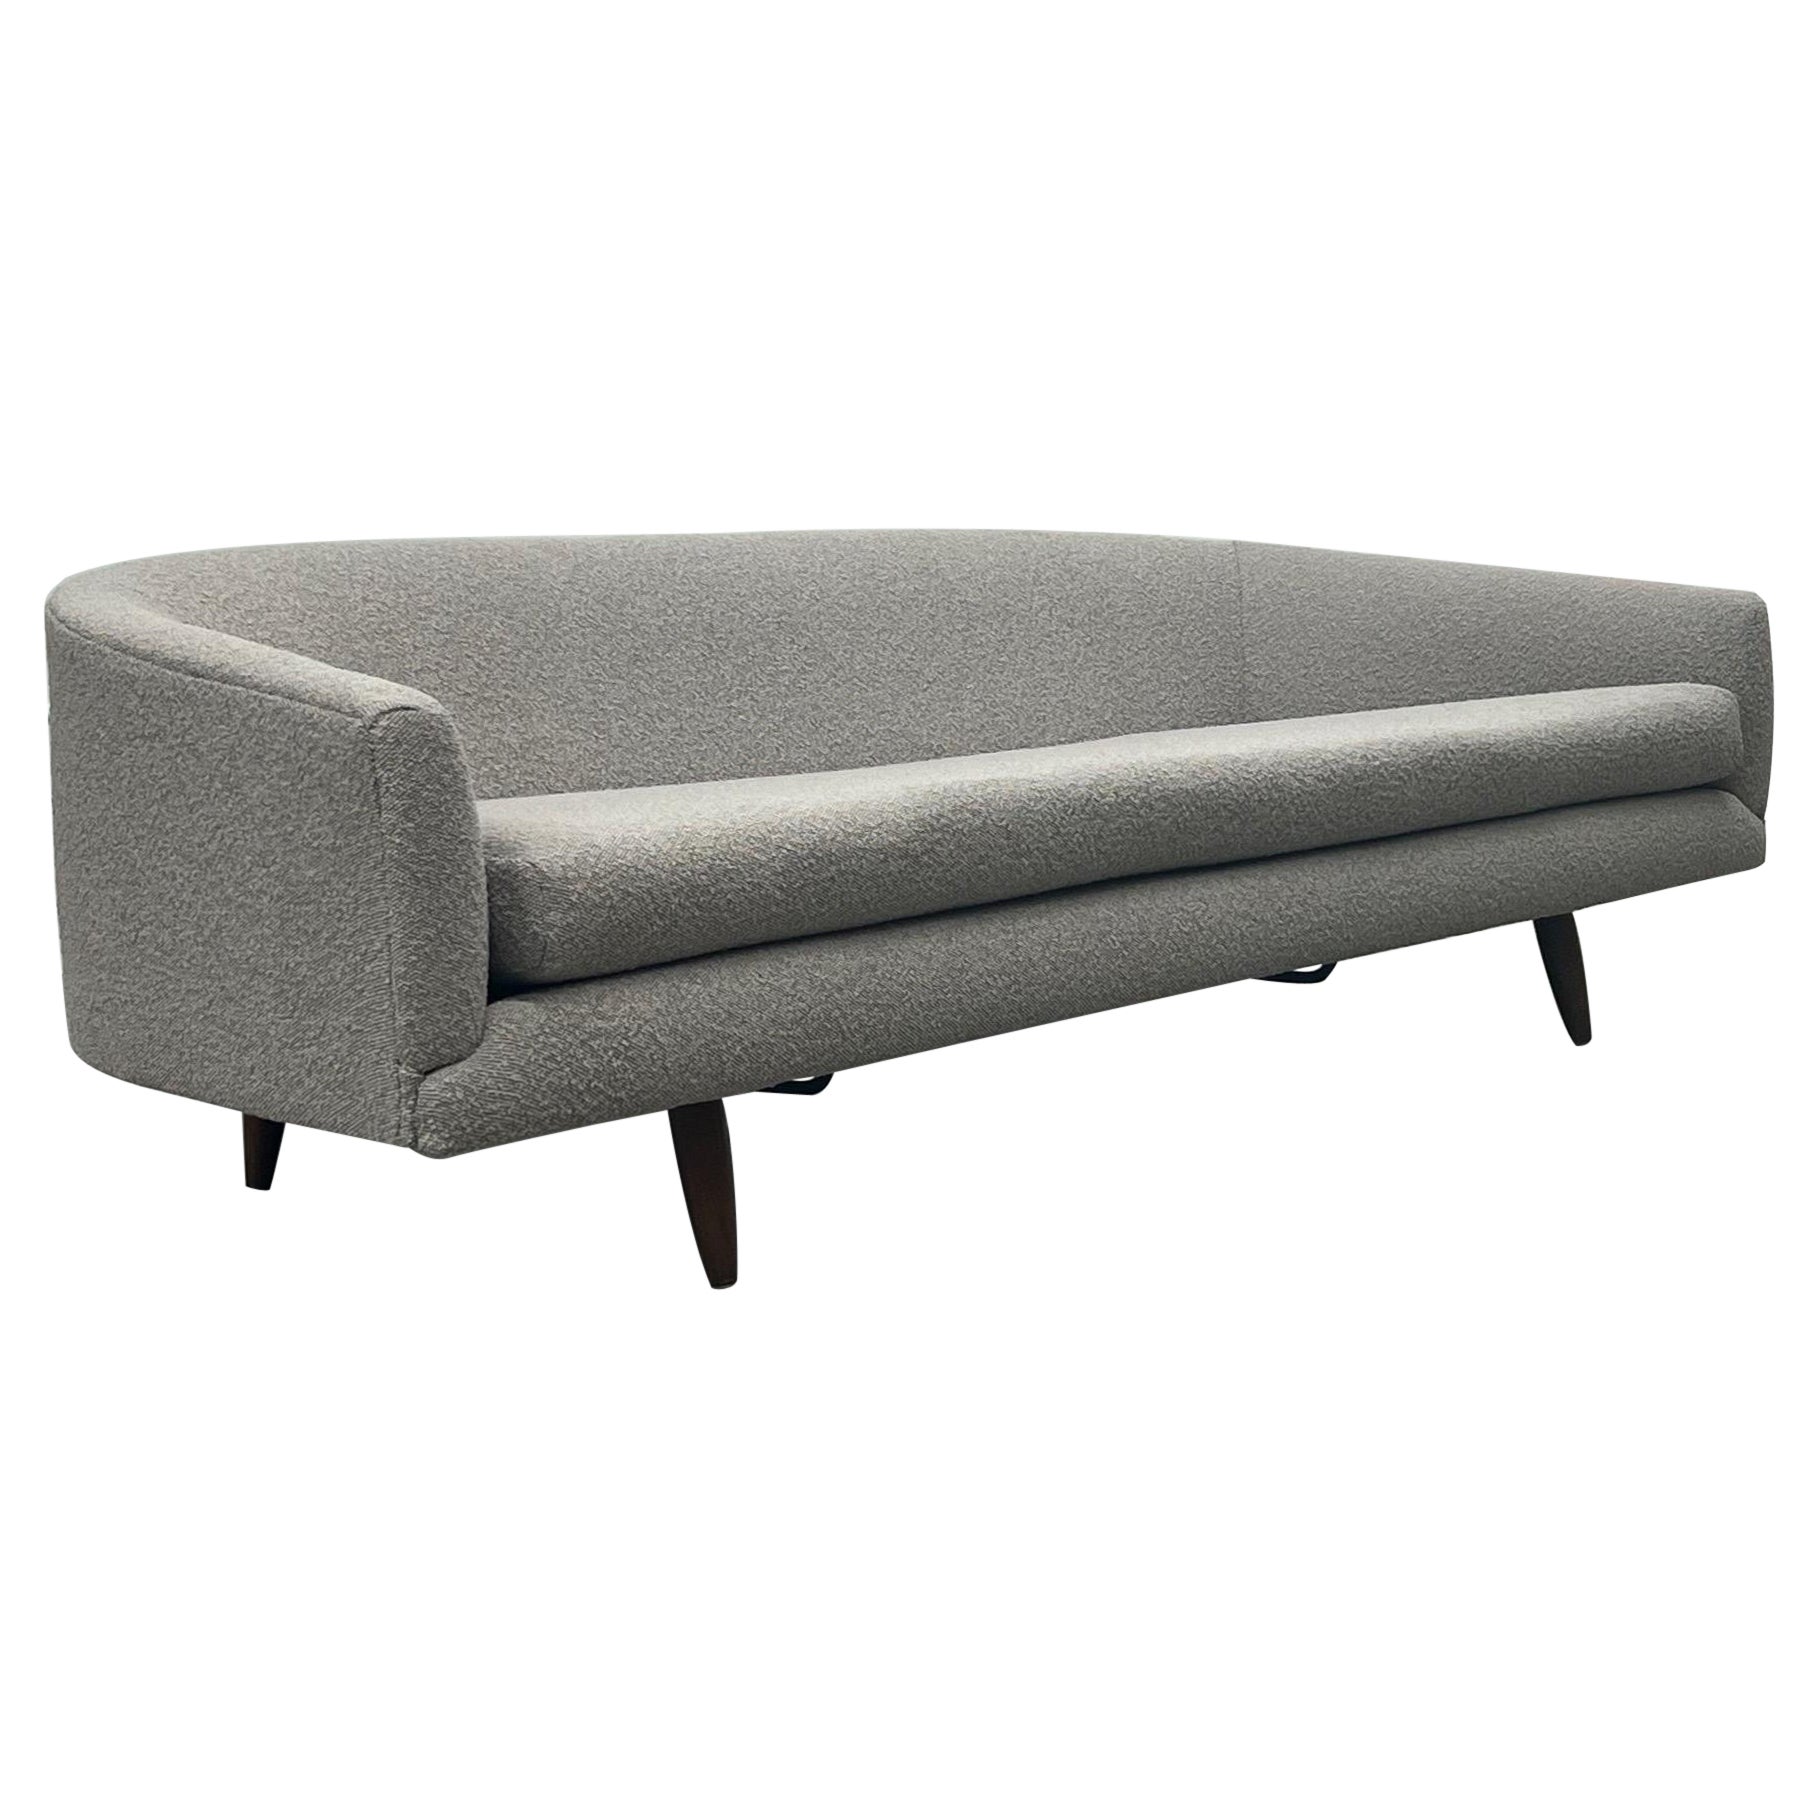 1950s Adrian Pearsall for Craft Associates Cloud Sofa